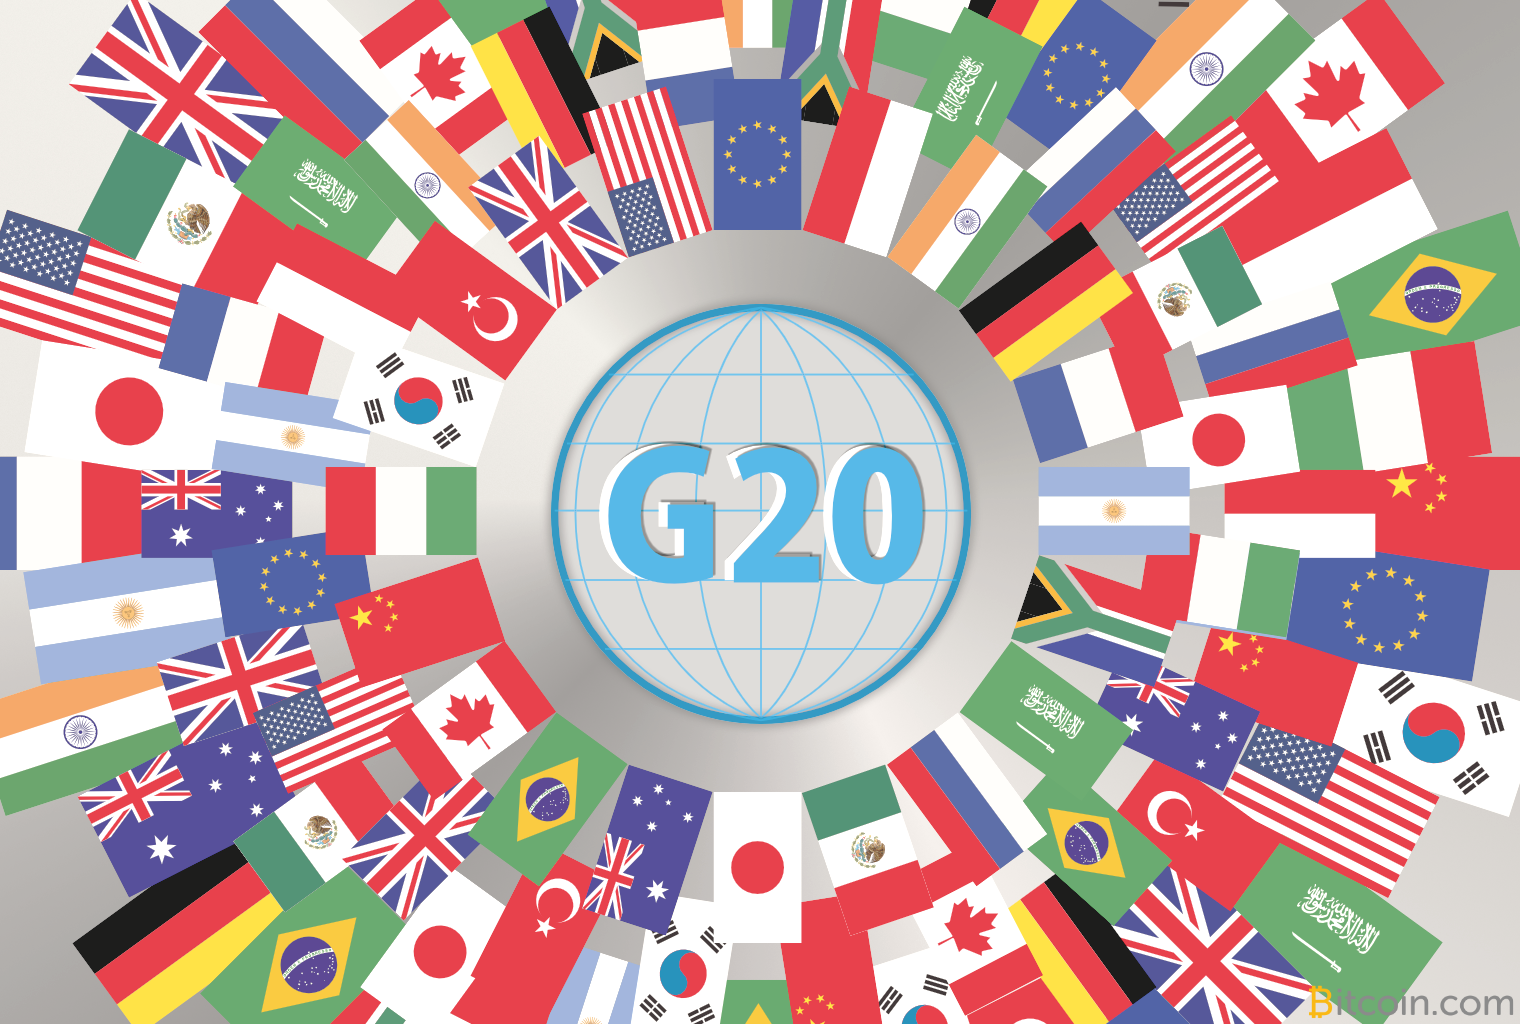 cryptocurrency regulation g20 financial system